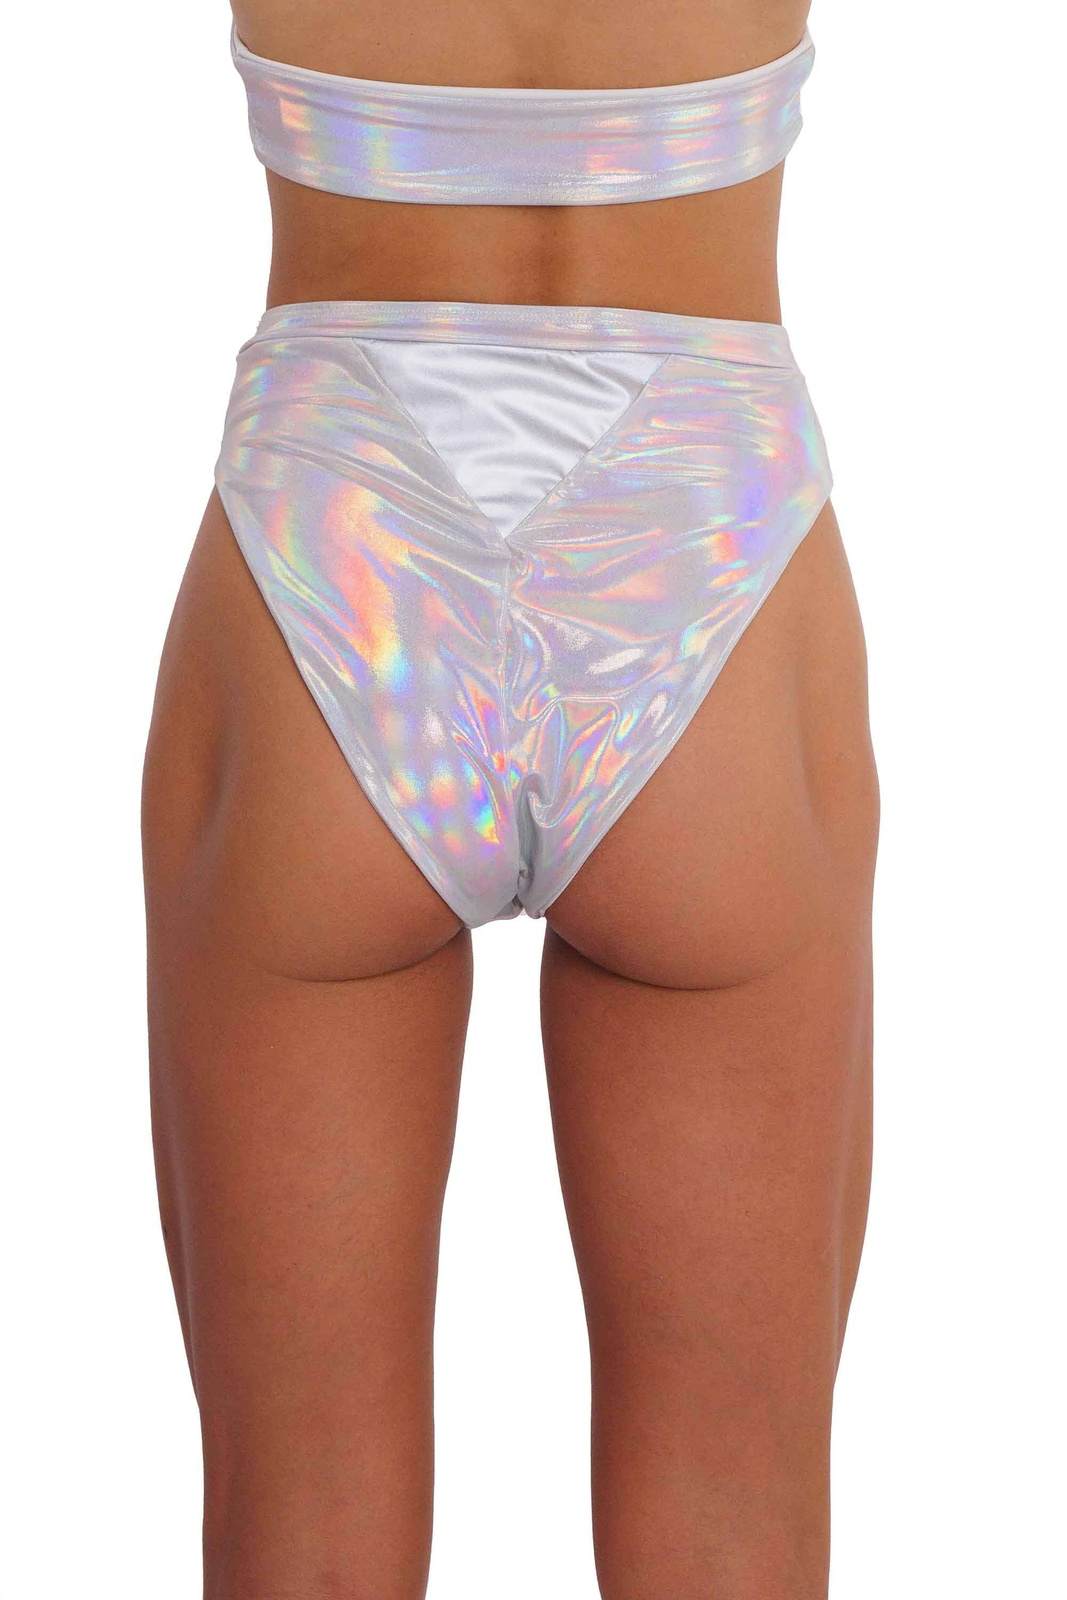 Bliss High Thigh Holographic White Rave Bottoms from Love Khaos Rave Wear Website